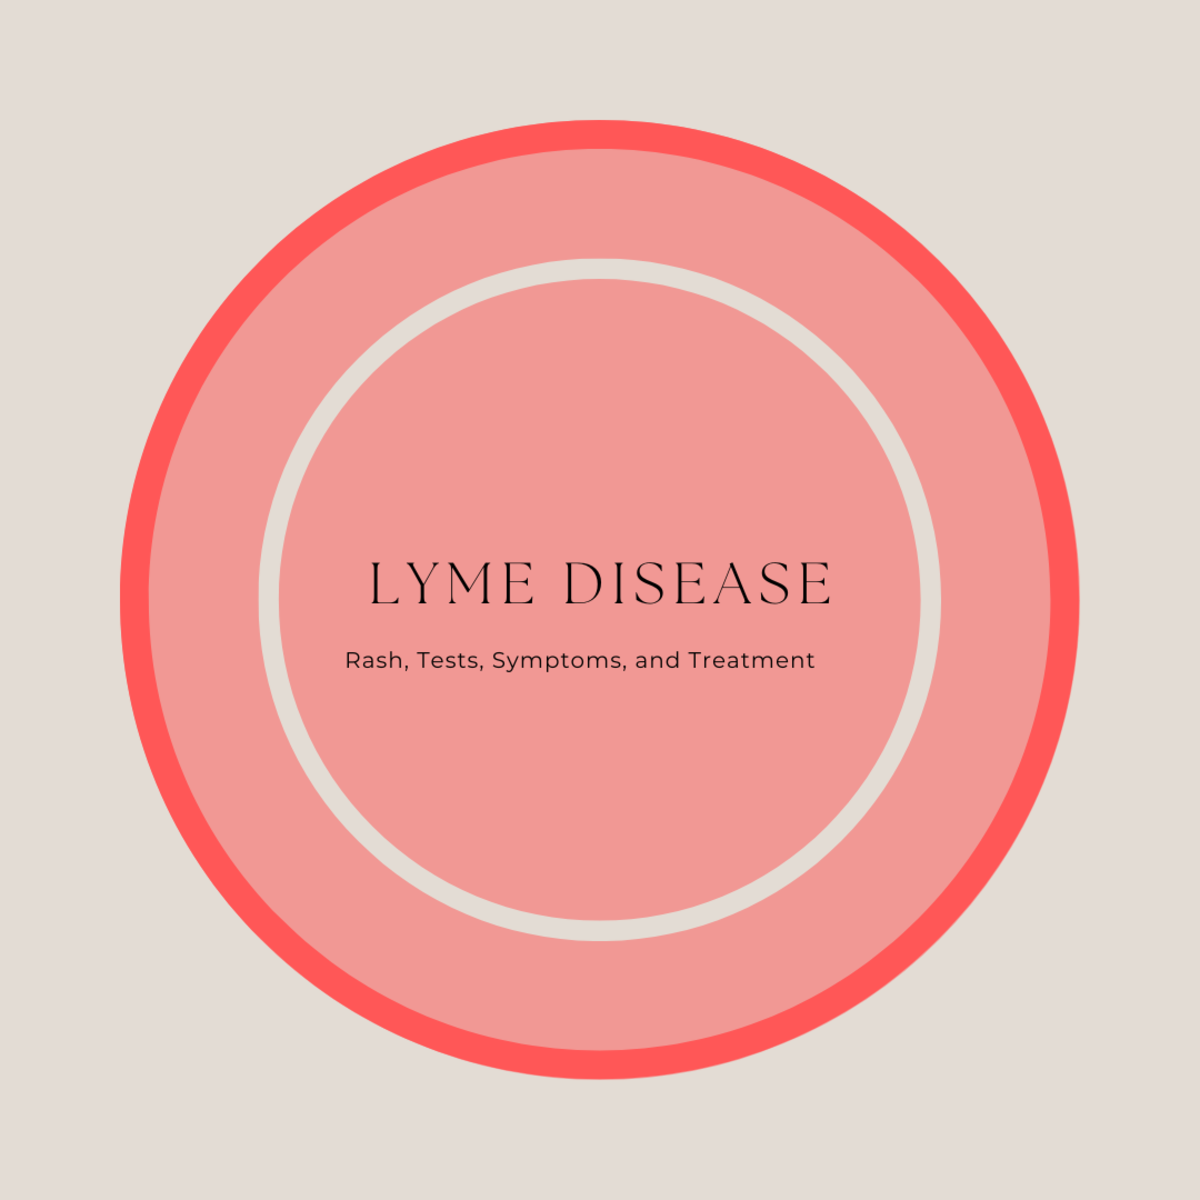 Do you have Lyme Disease?